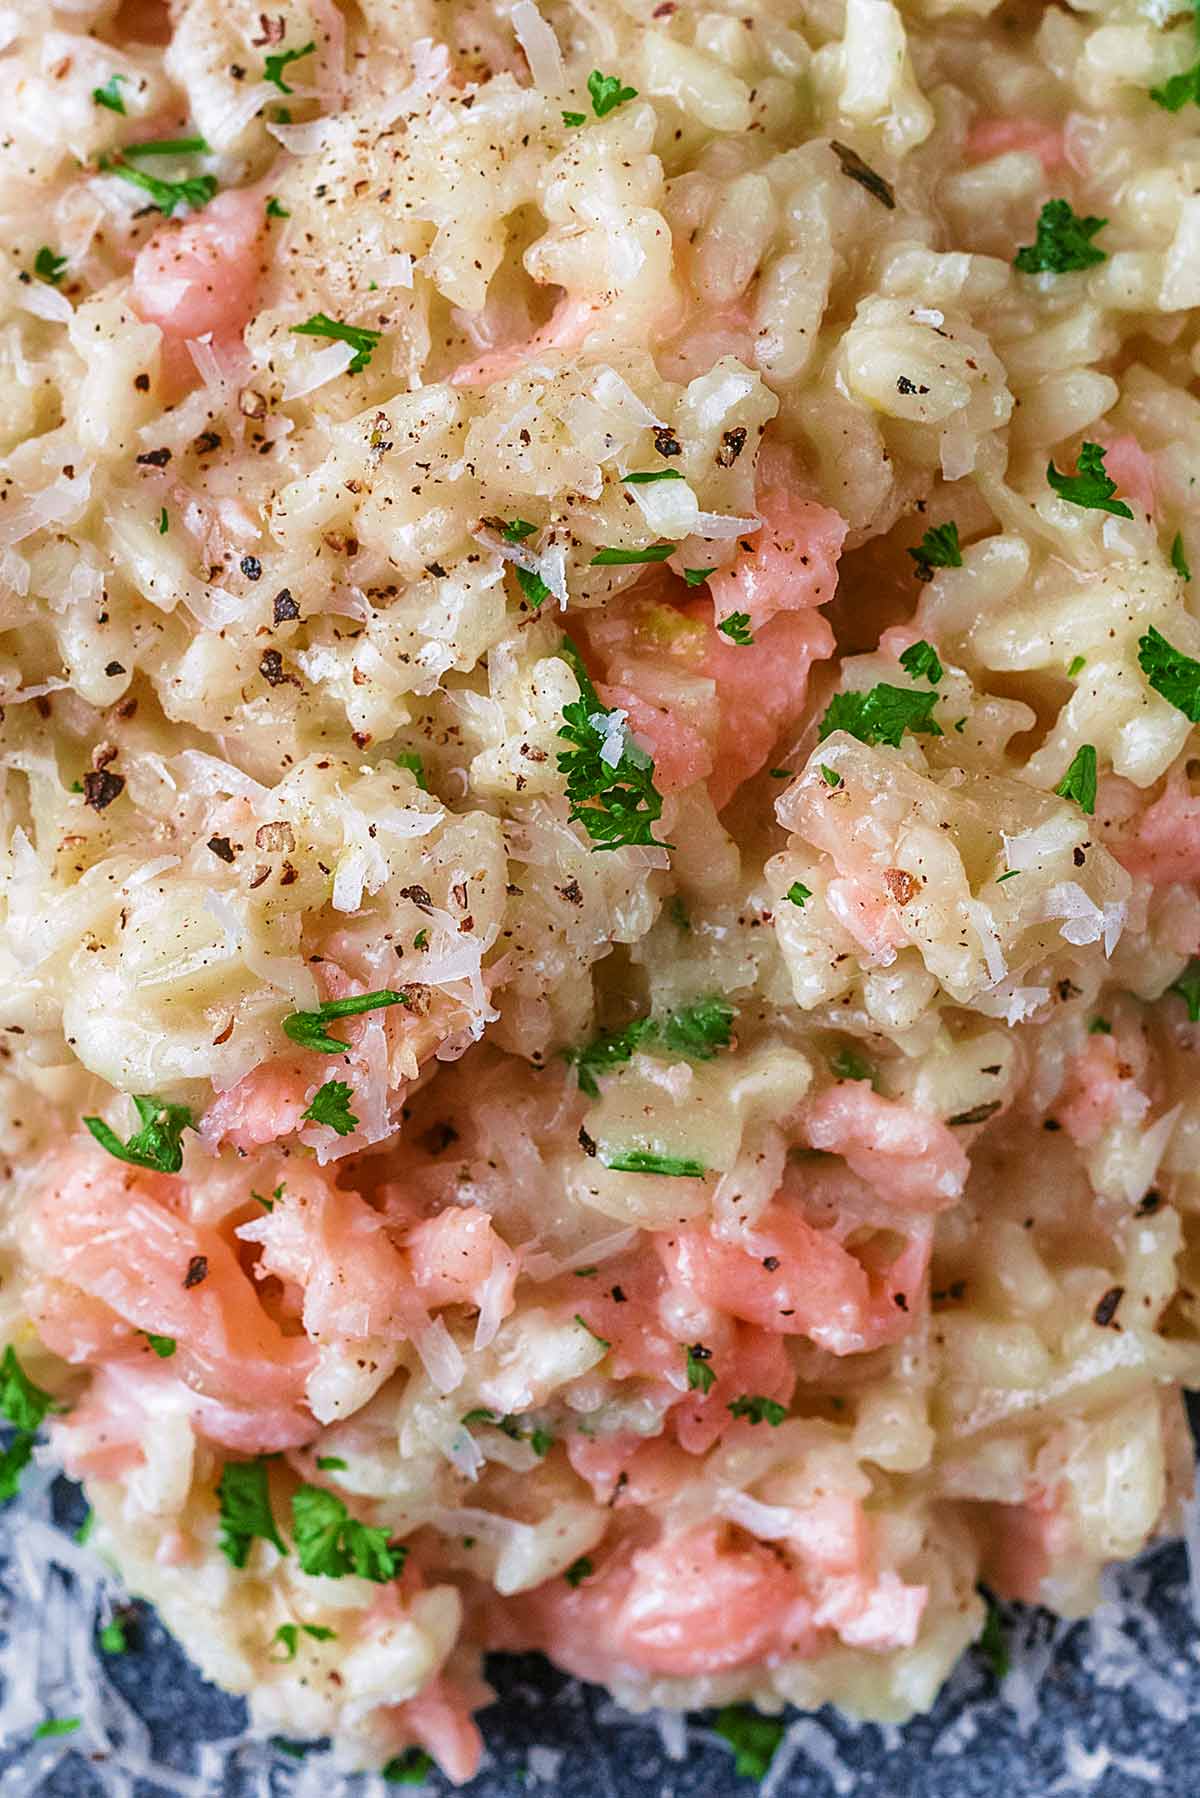 Smoked salmon and chopped herbs mixed into cooked risotto rice.